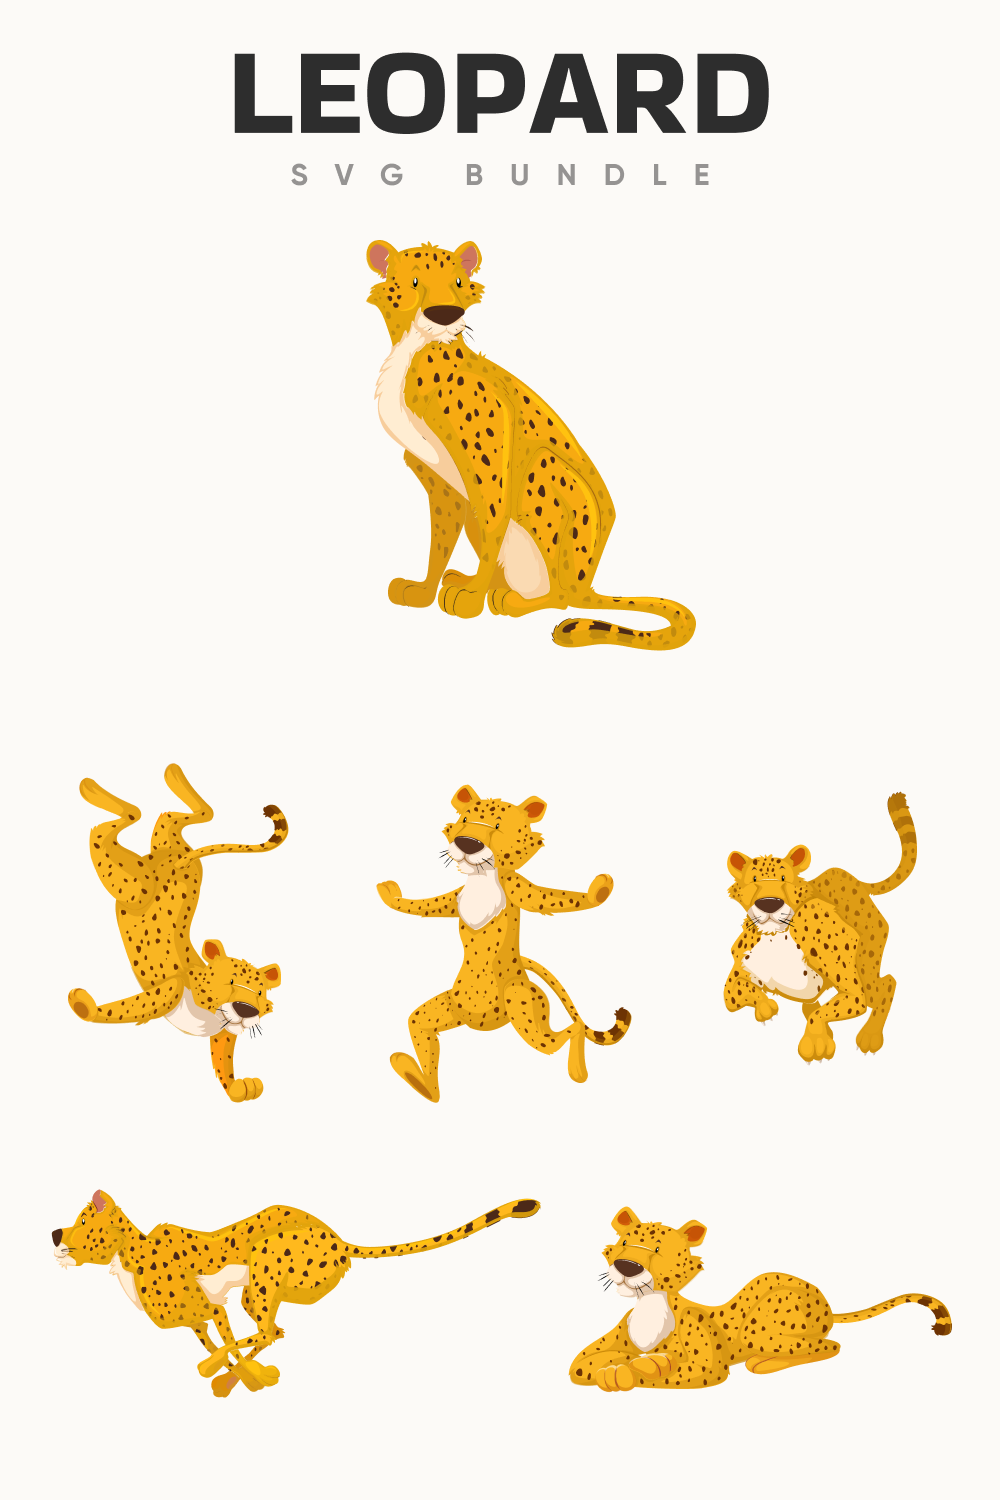 Picture of a cheetah and other animals on a white background.